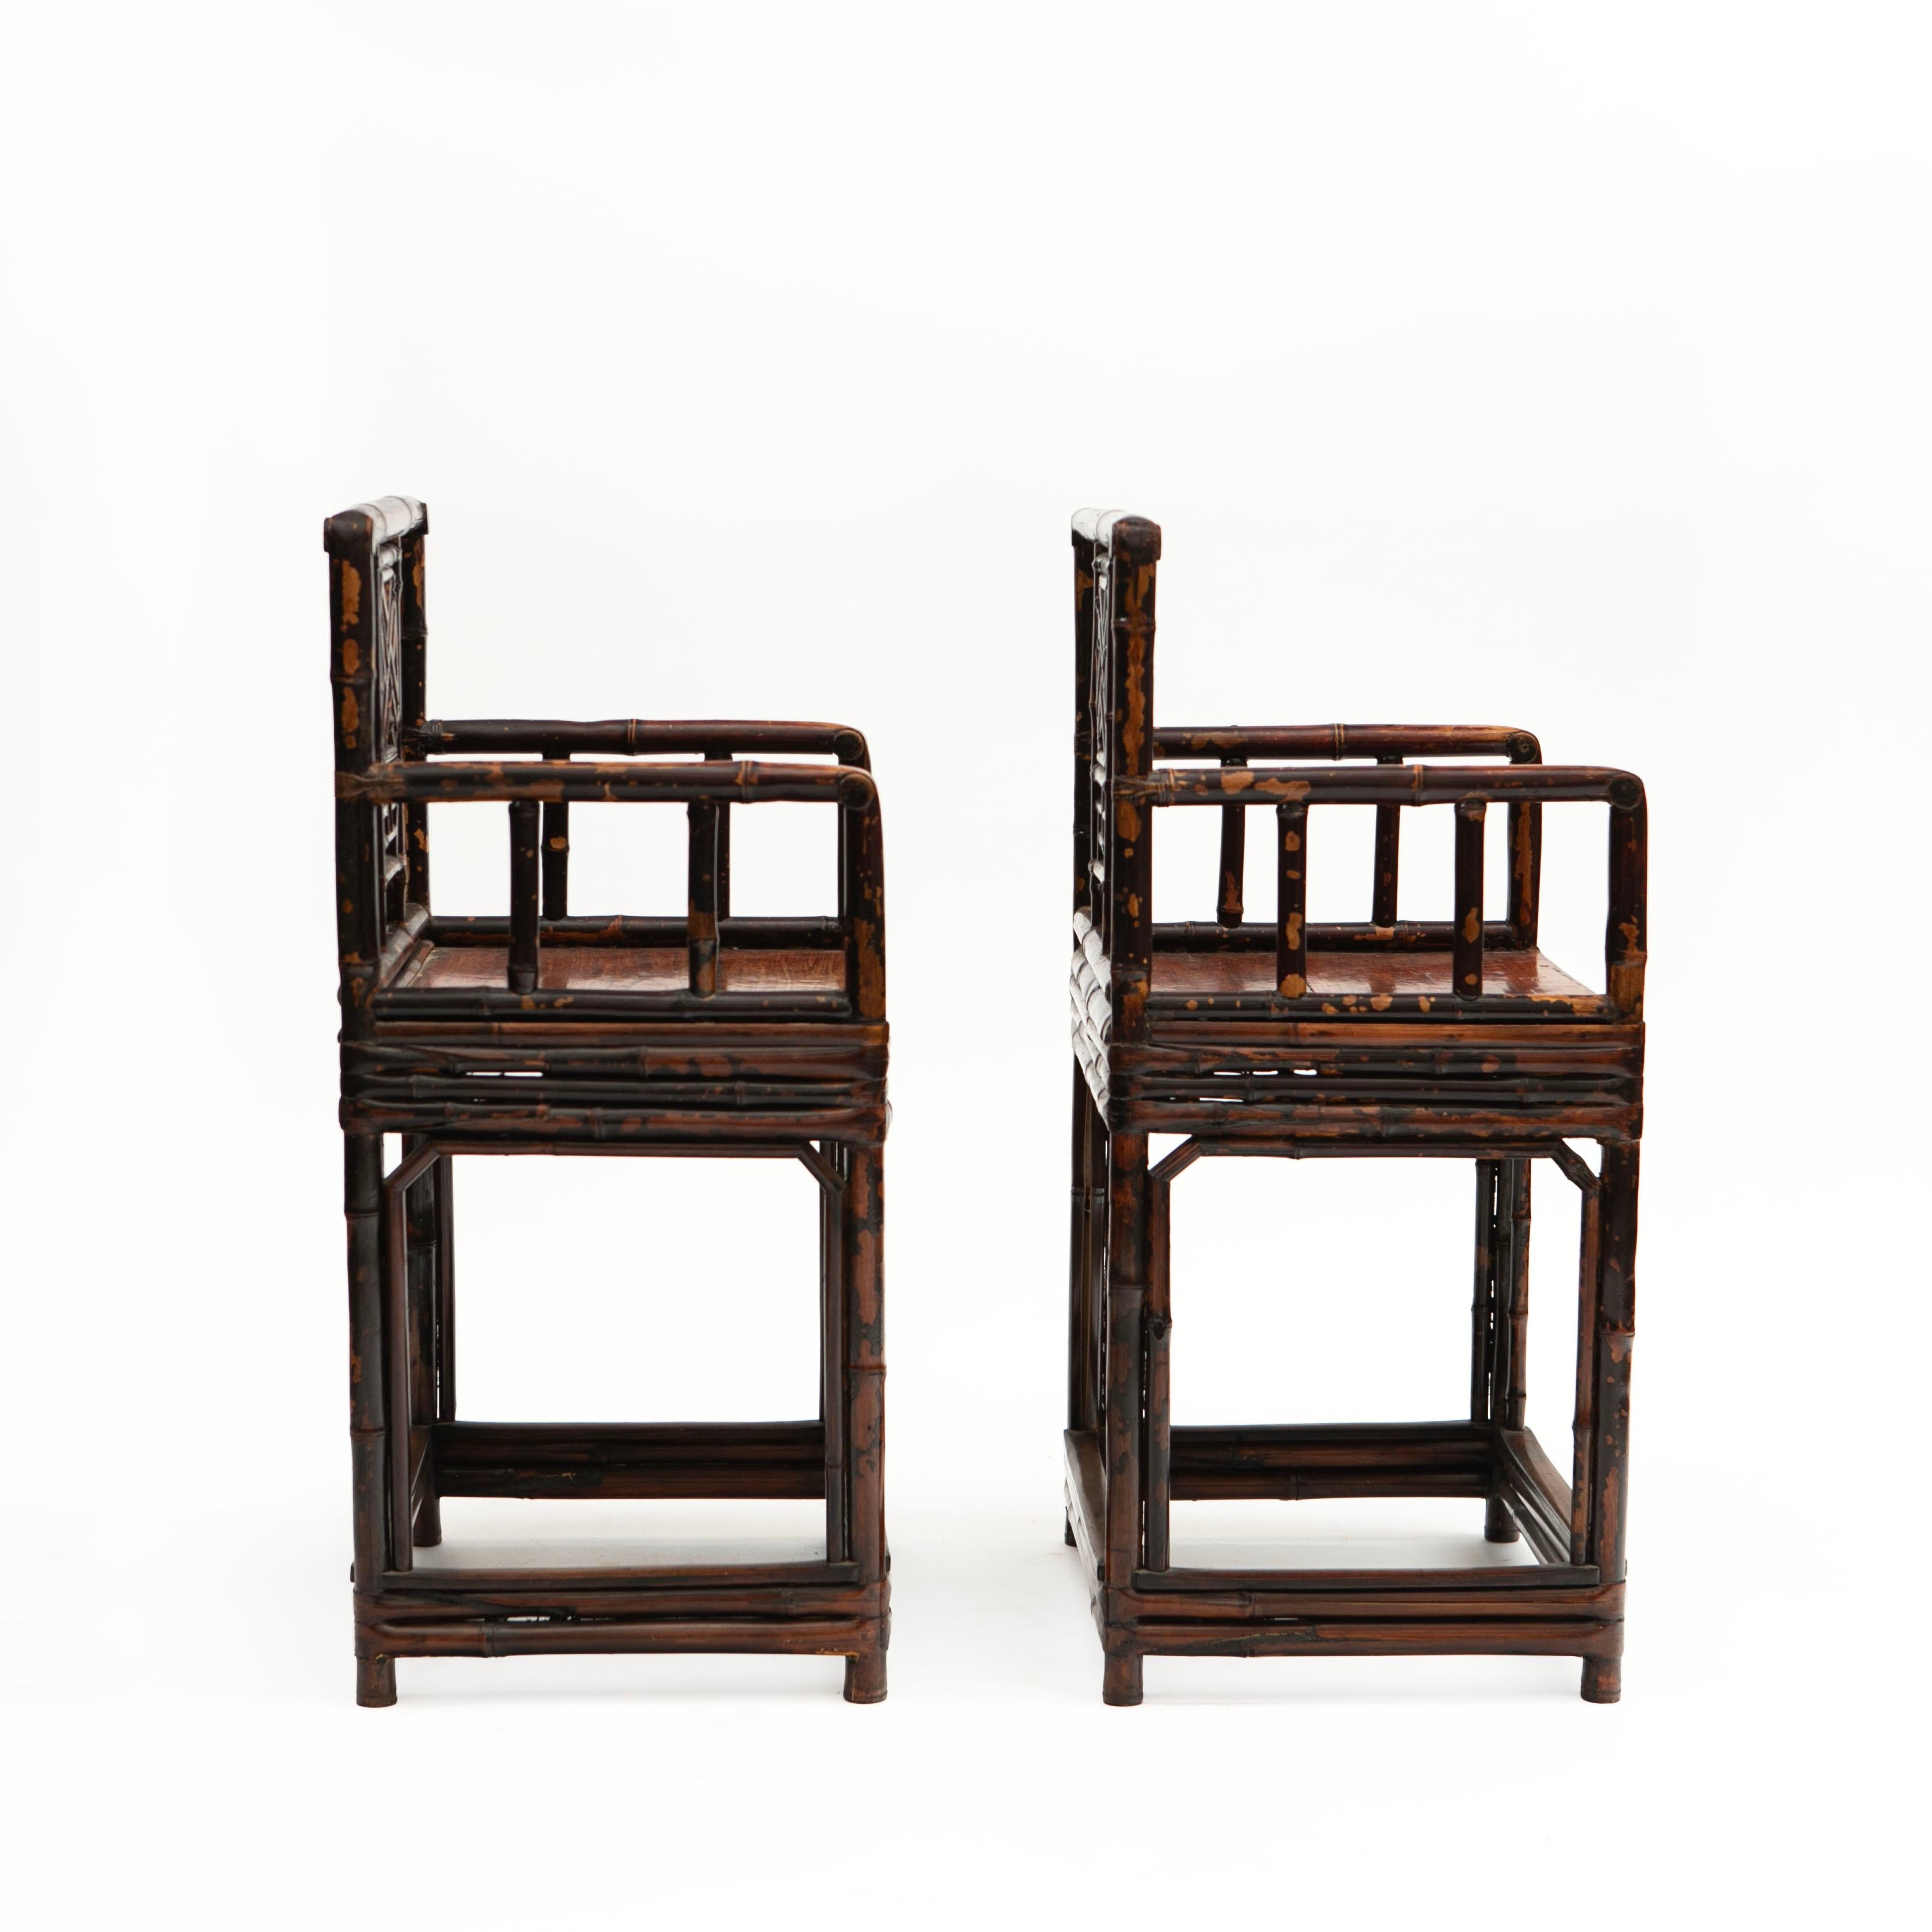 Pair of 19th Century Chinese Qing Period Bamboo Arm Chairs with Burgundy Lacquer In Good Condition For Sale In Kastrup, DK